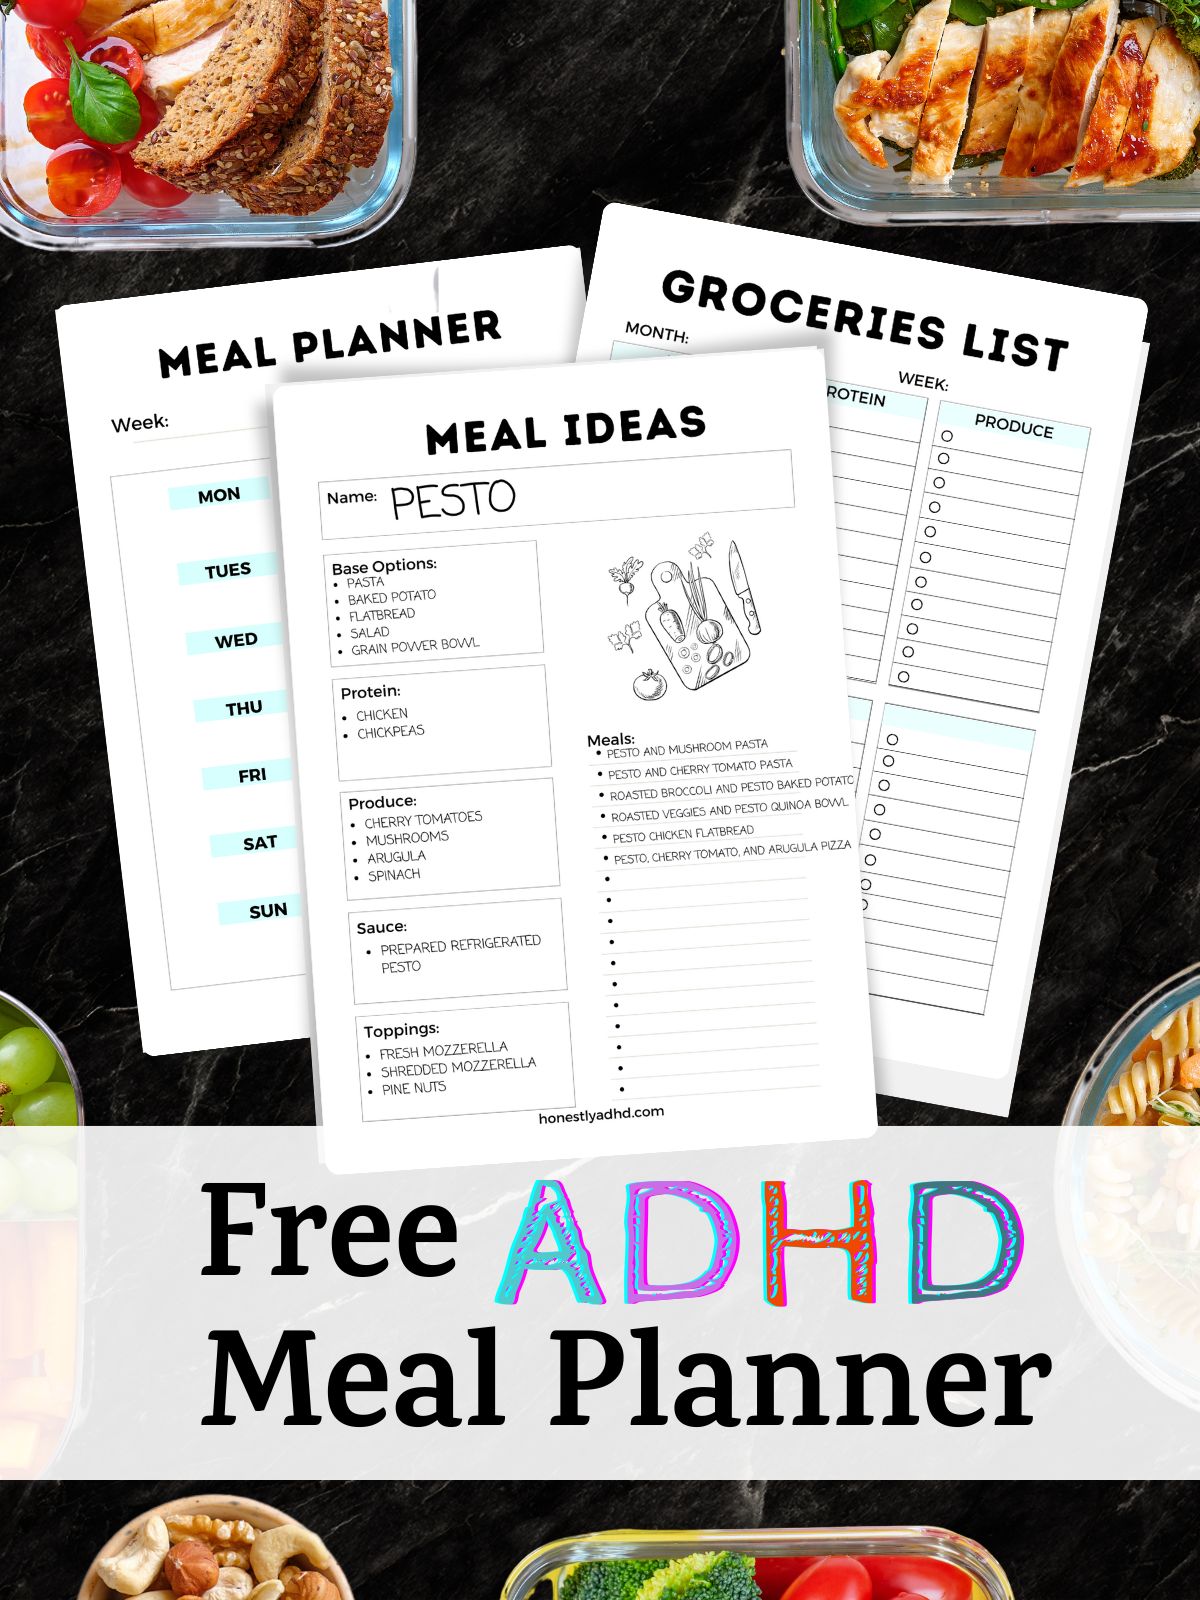 3 printable ADHD meal plan pdfs with the text overlay "free ADHD meal planner."